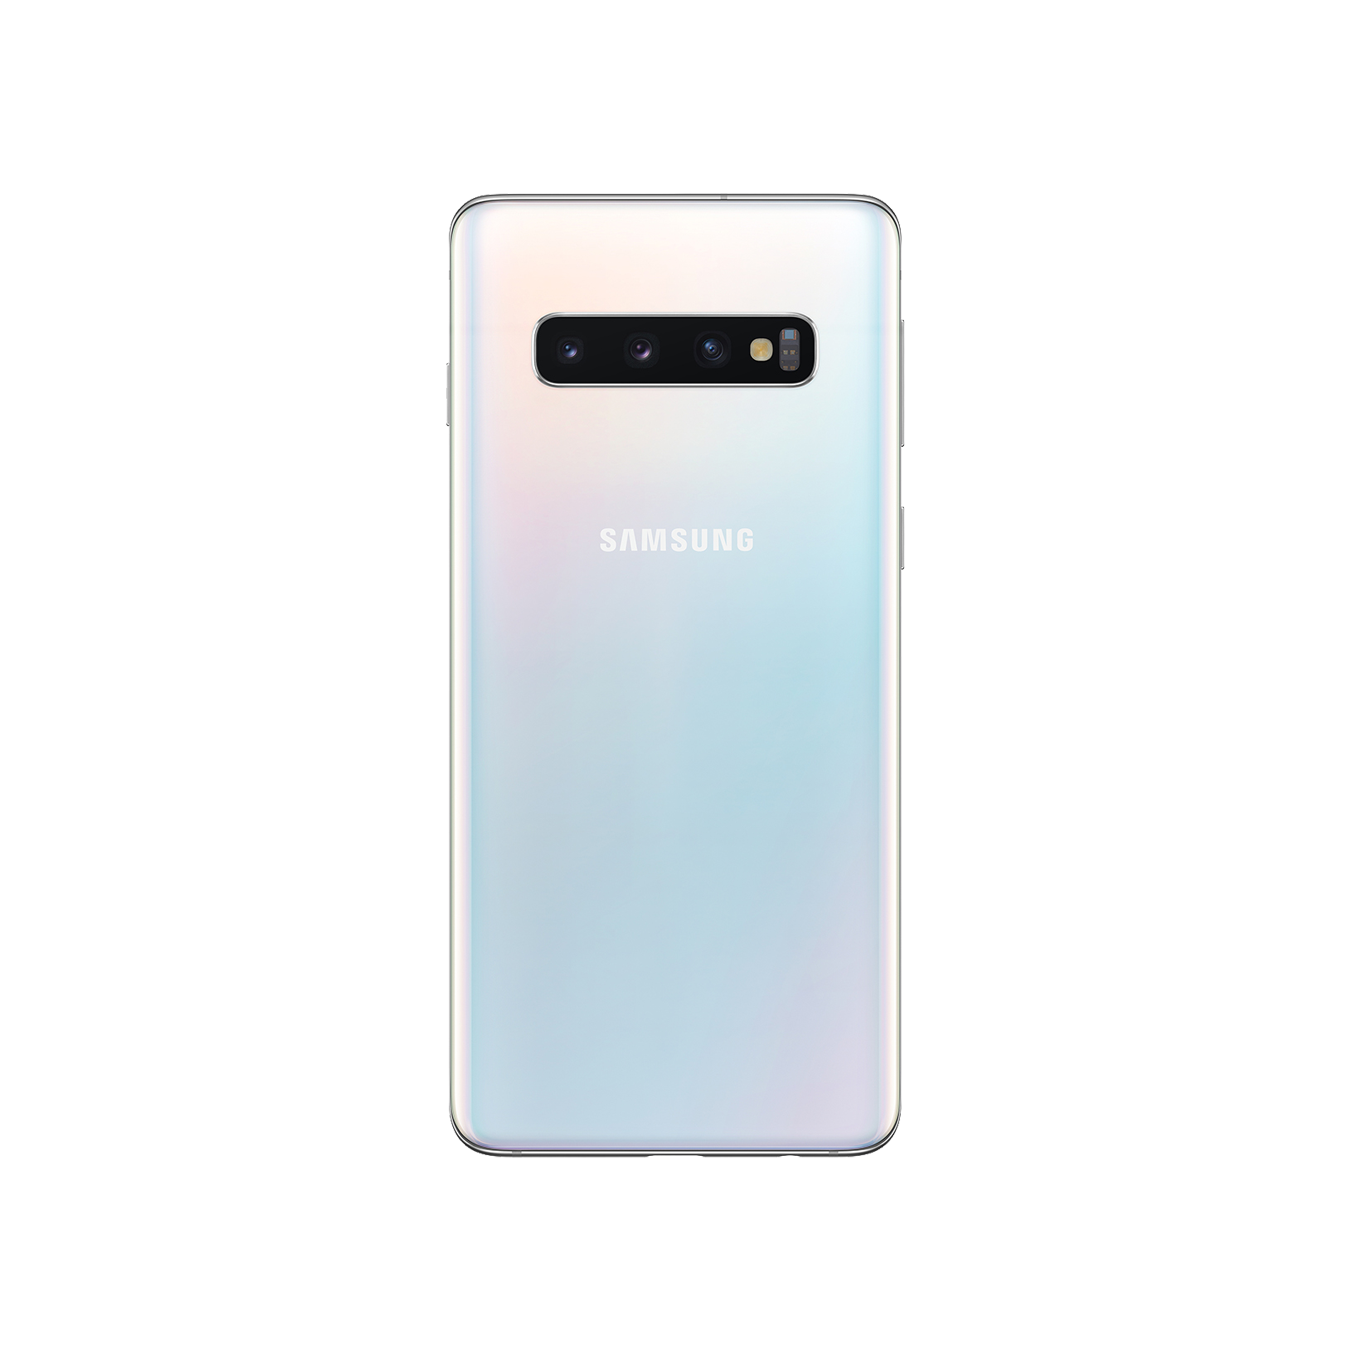 Samsung Galaxy S10 network unlock, remove SIM restrictions for global use, available at cleanimei.com